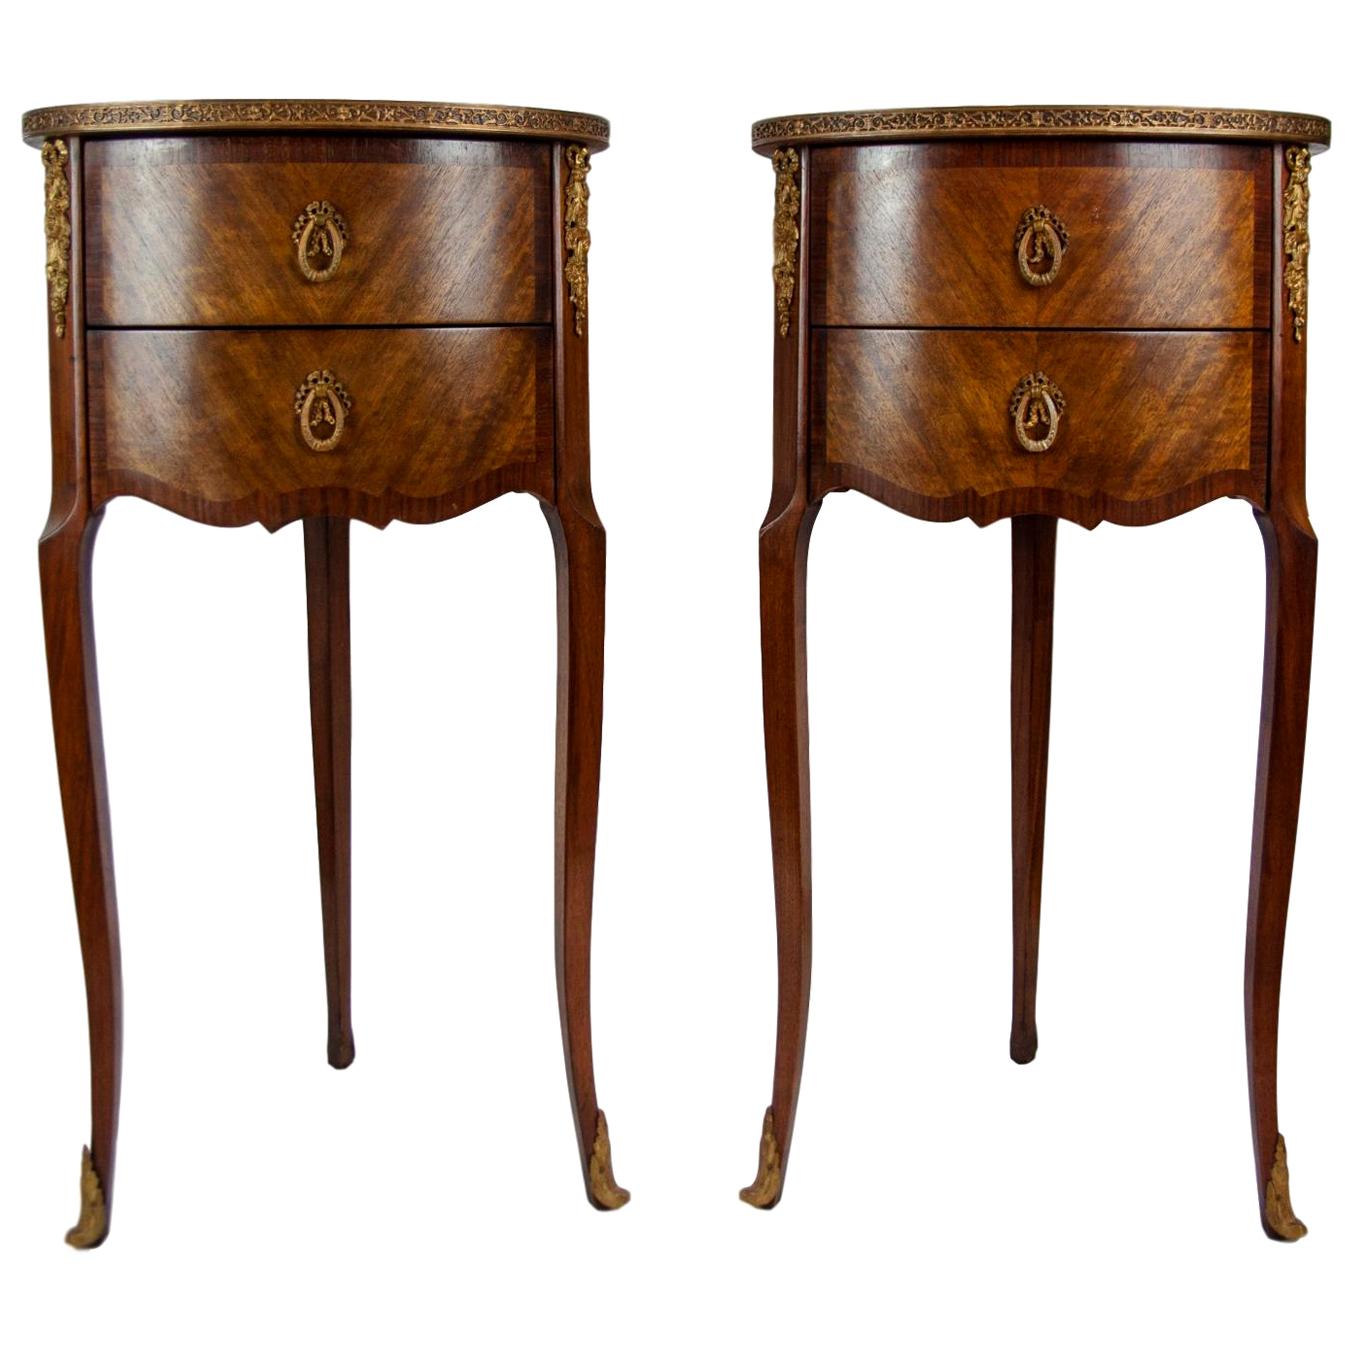 Pair of Walnut Rosewood Cross-Banded Two-Drawer Side Tables, French, circa 1920